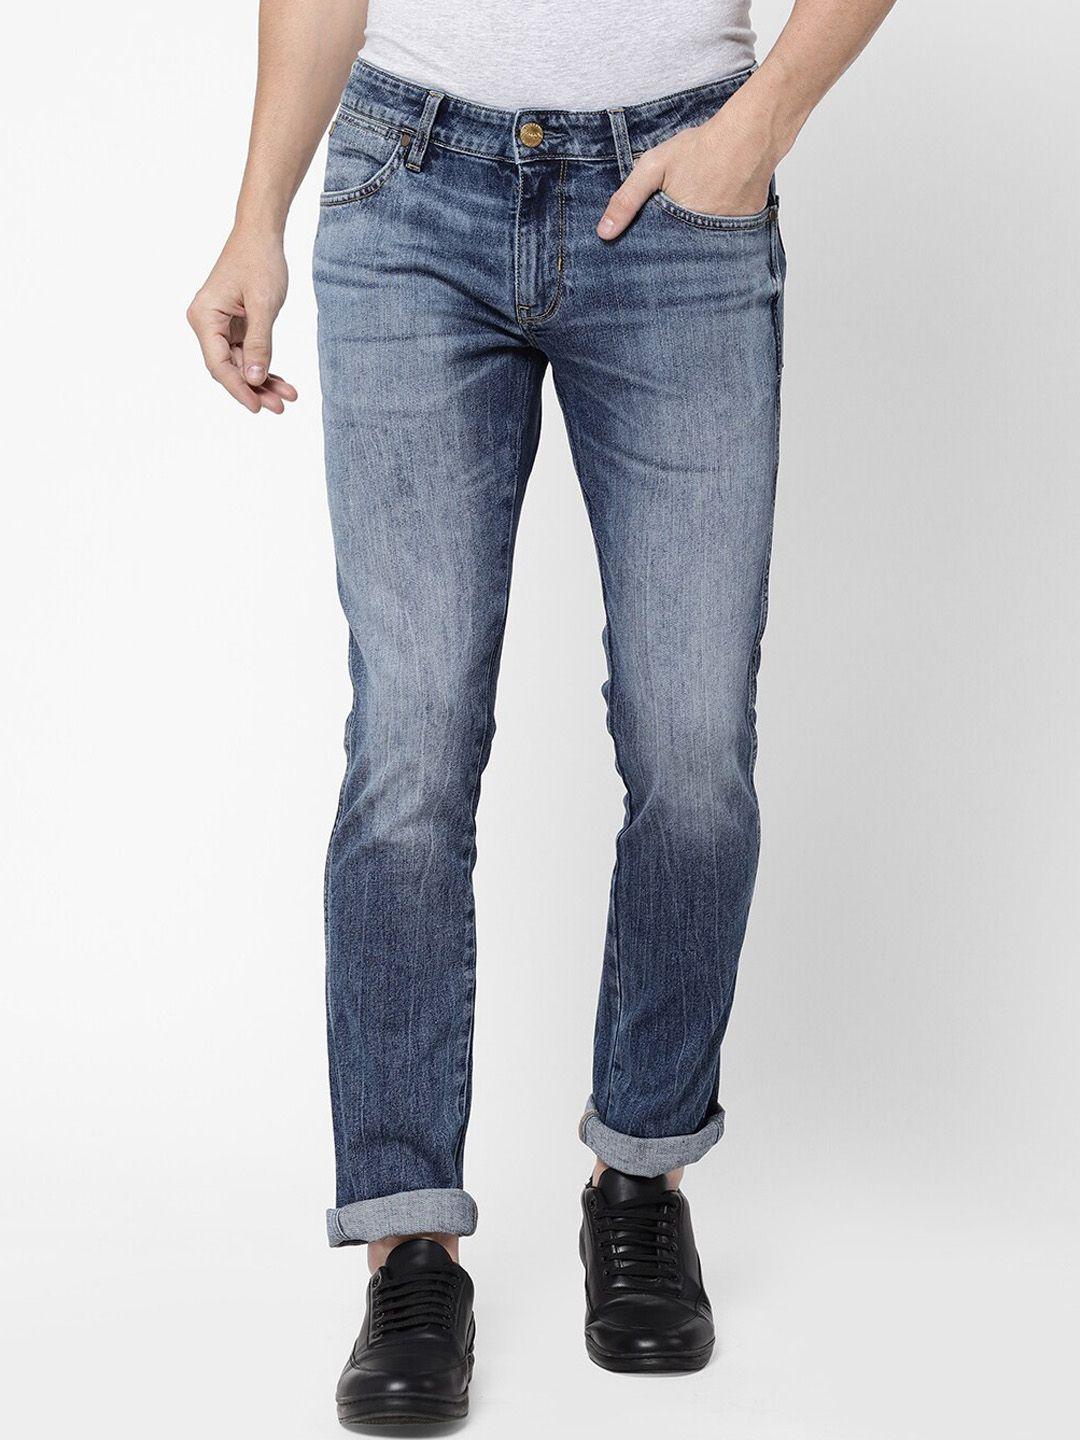 wrangler-men-blue-slim-fit-low-rise-low-distress-heavy-fade-stretchable-jeans